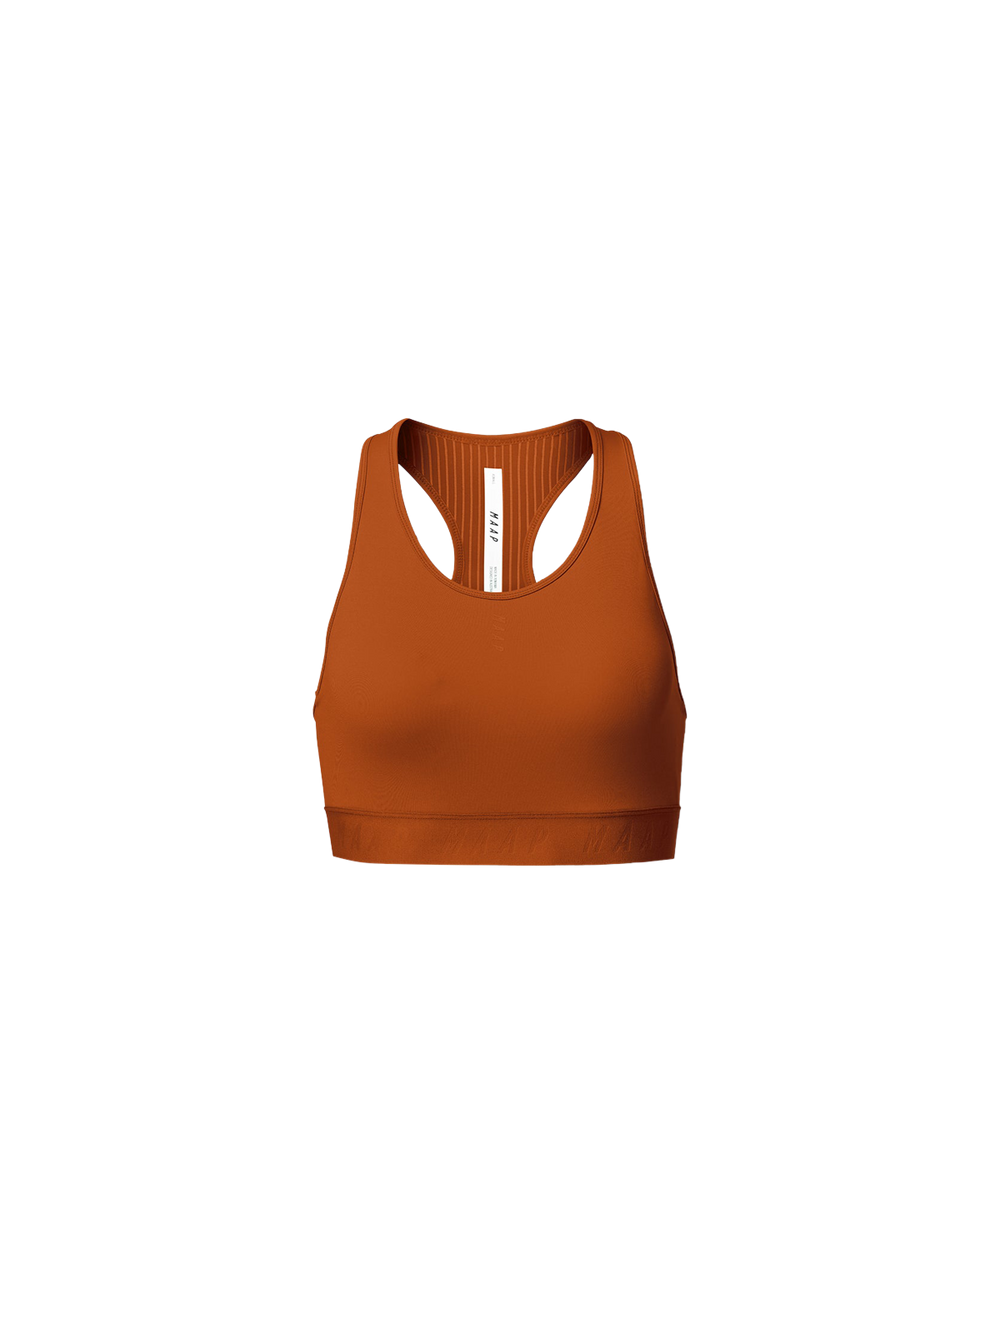 Product Image for Women's Sequence Crop